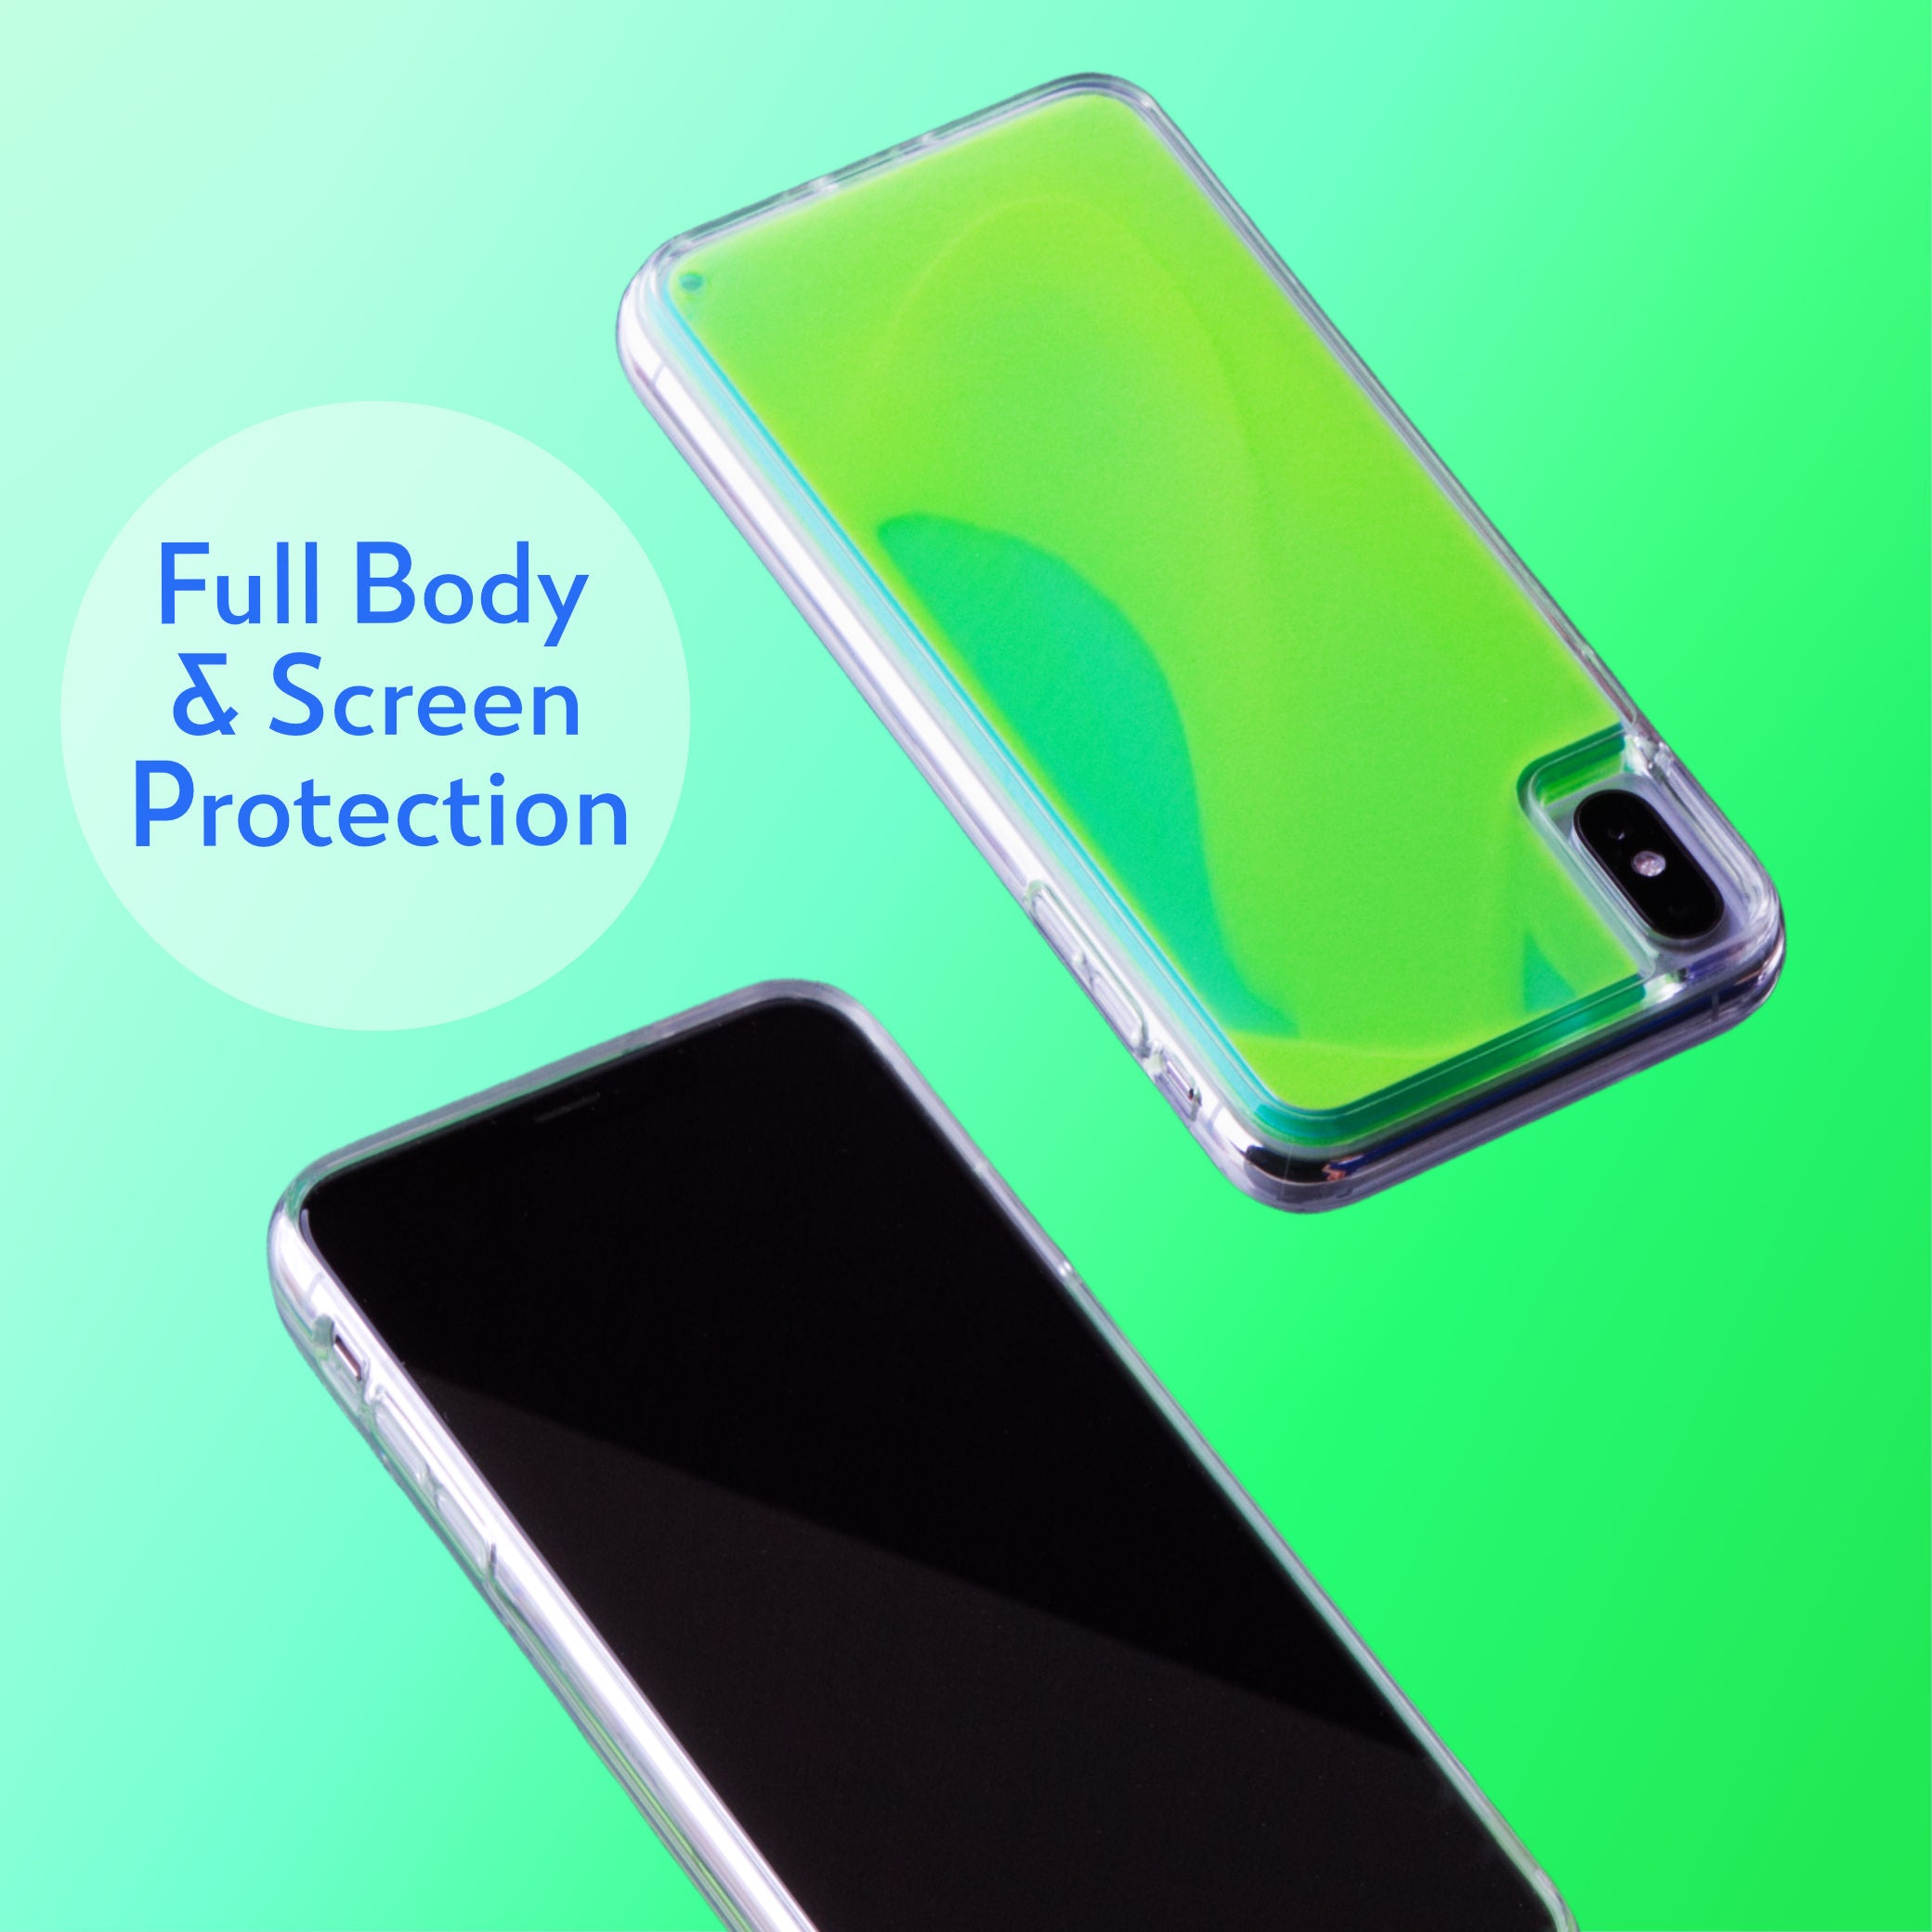 Neon Sand iPhone Xs Max Case - Mint and Neon Green Glow